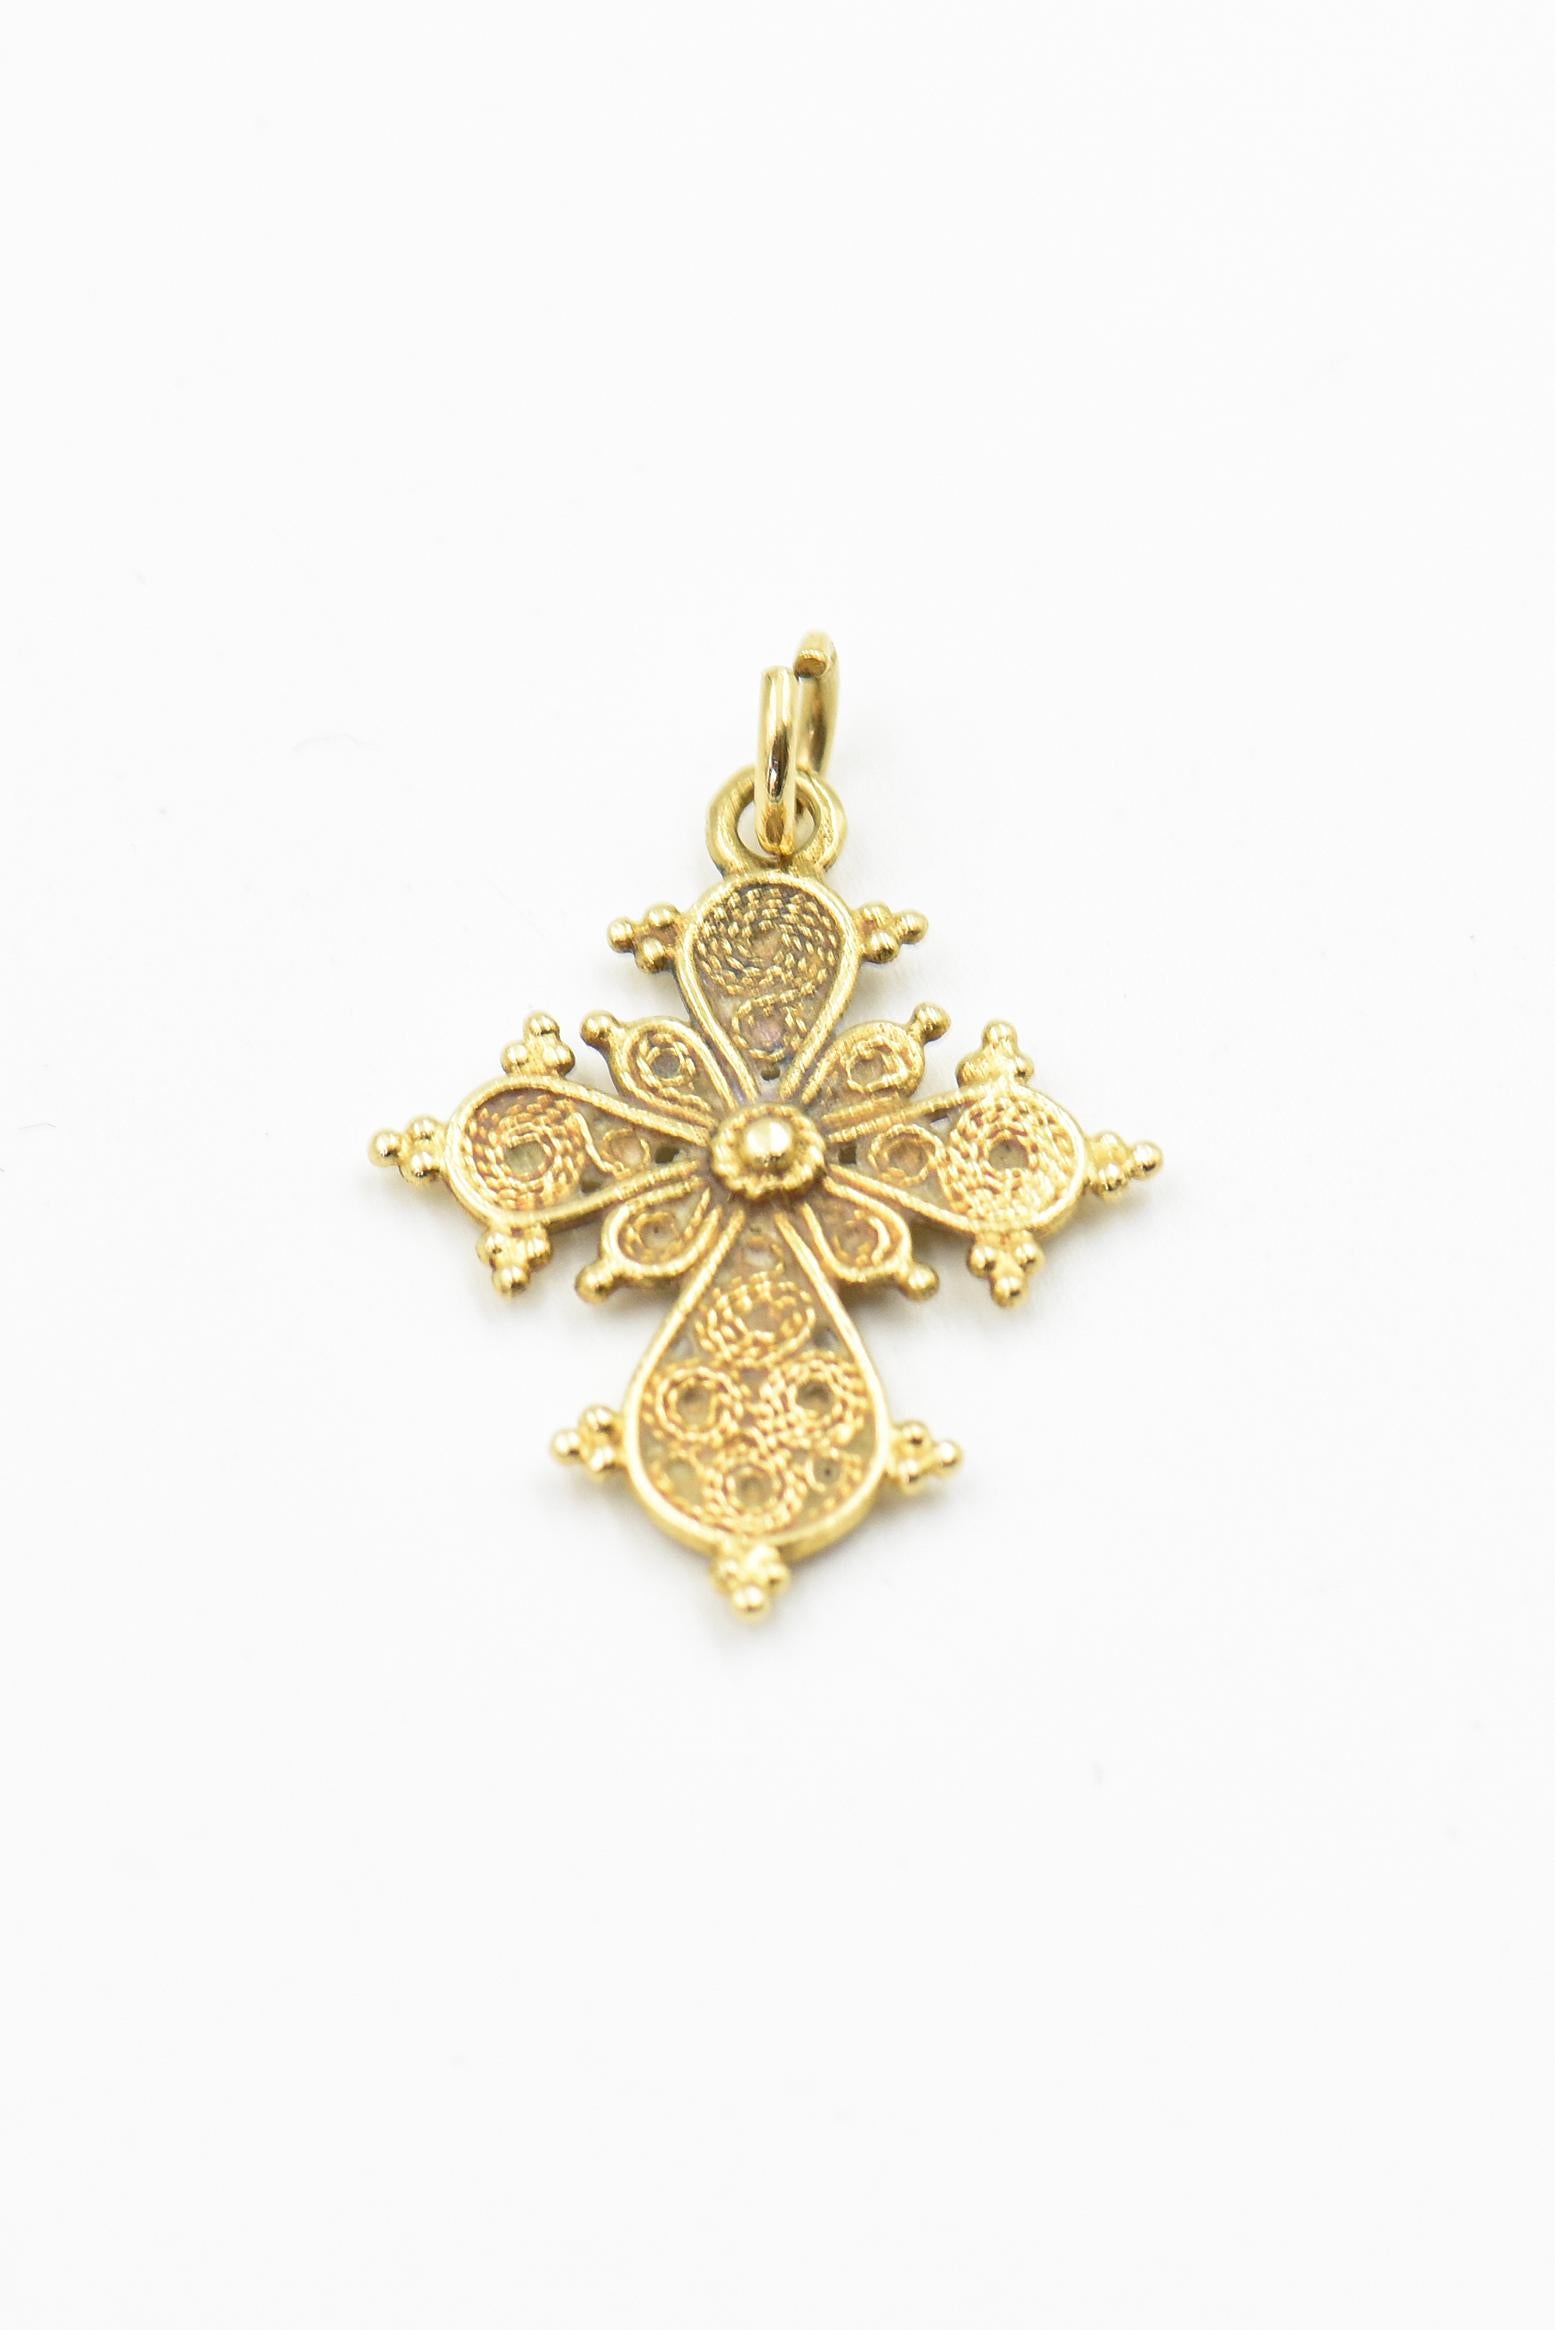 Etruscan Yellow Gold Cross Pendant for Necklace or Charm For Sale 1